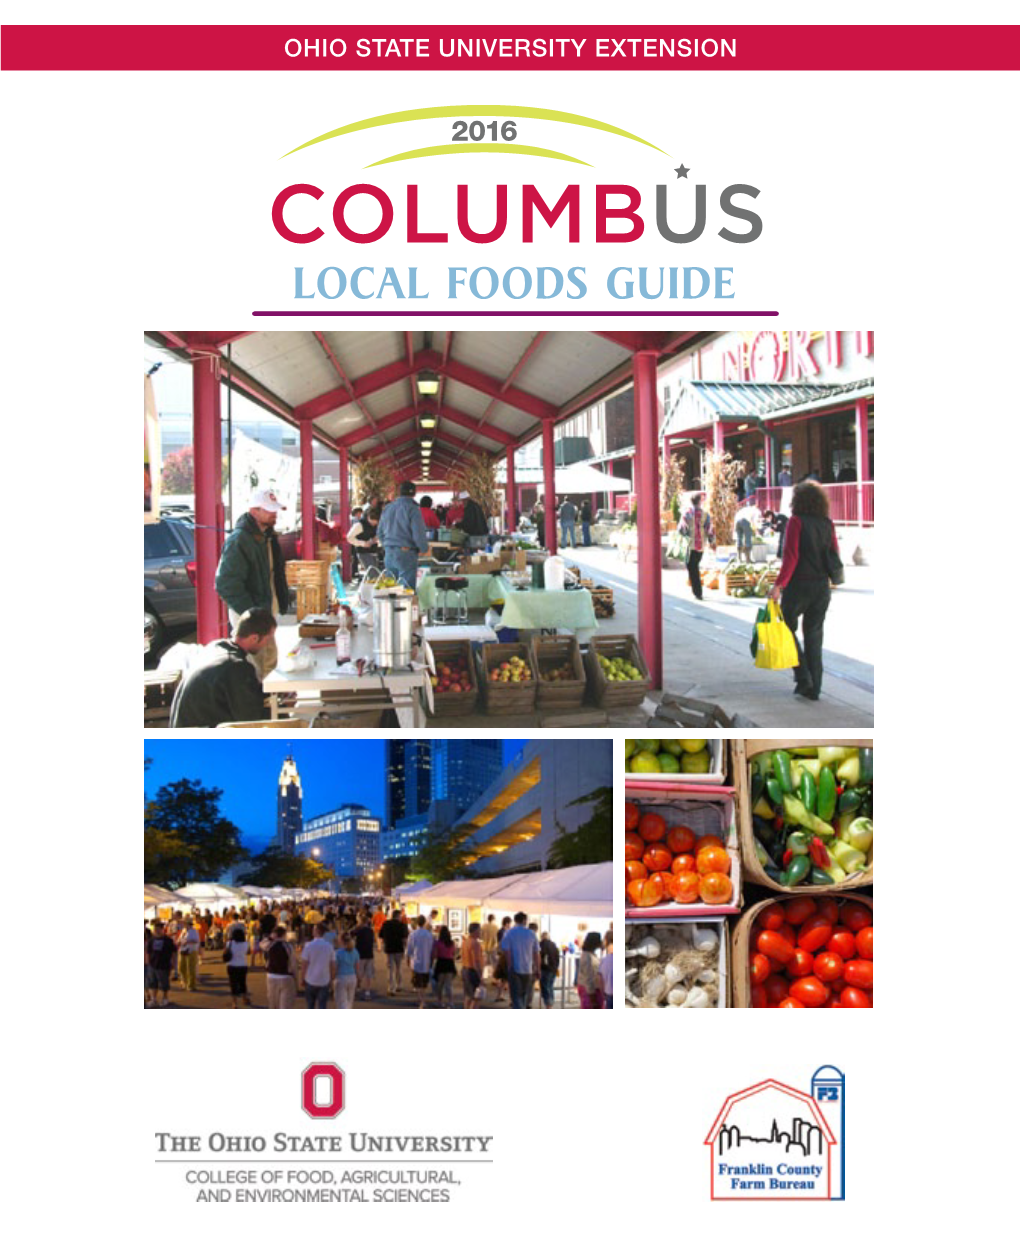 Local Foods Guide Ohio State University Extension Ohio Ostatehio Sta Tuniversitye University Ext Eextensionnsion